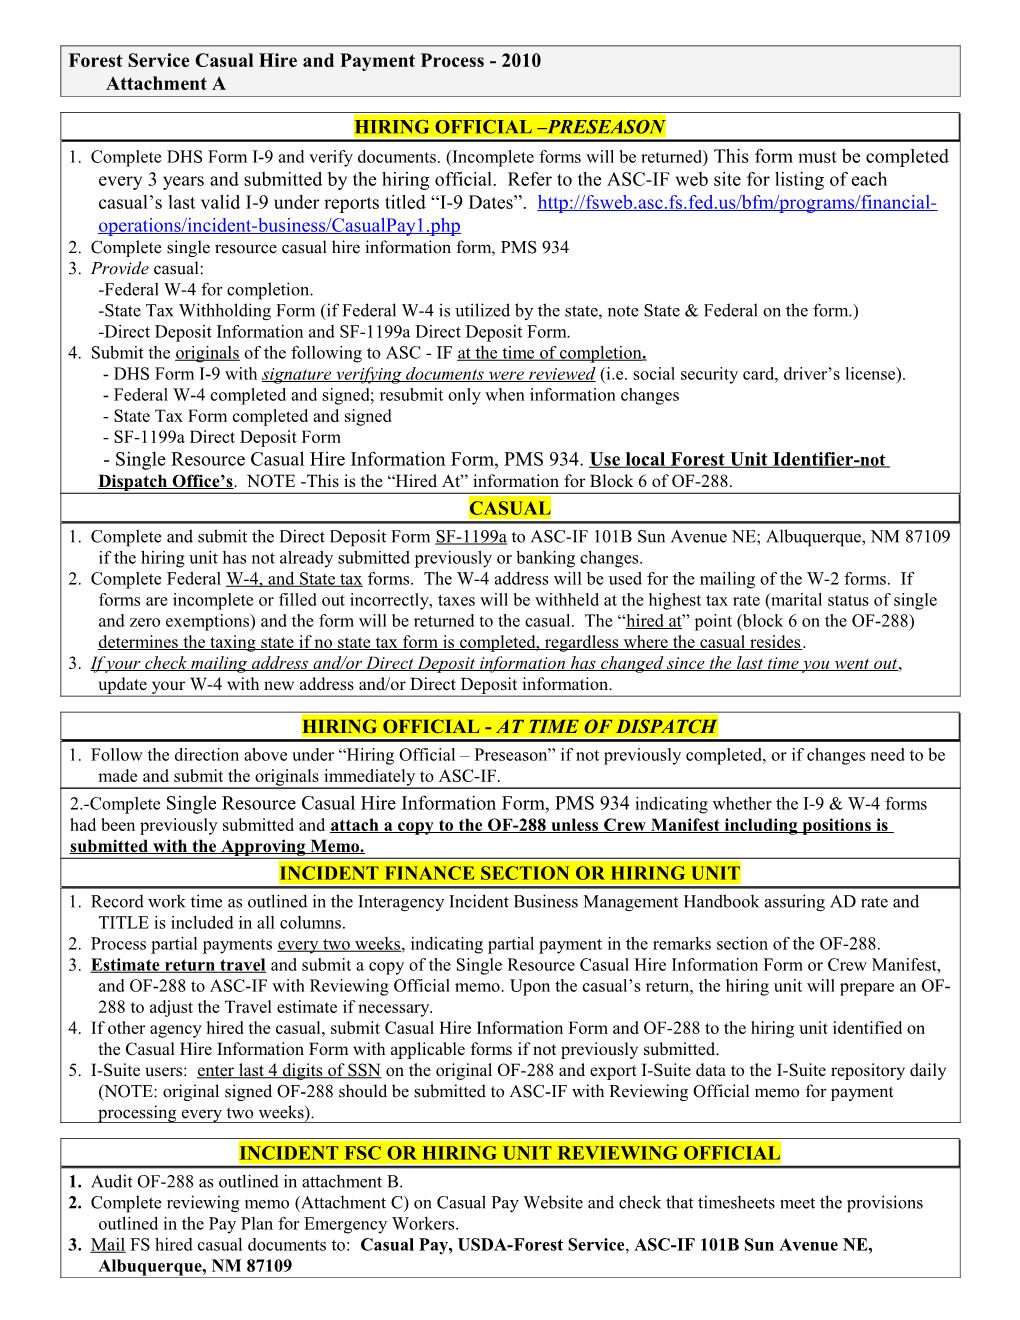 Forest Service Casual Hire and Payment Process - 2010 Attachment A